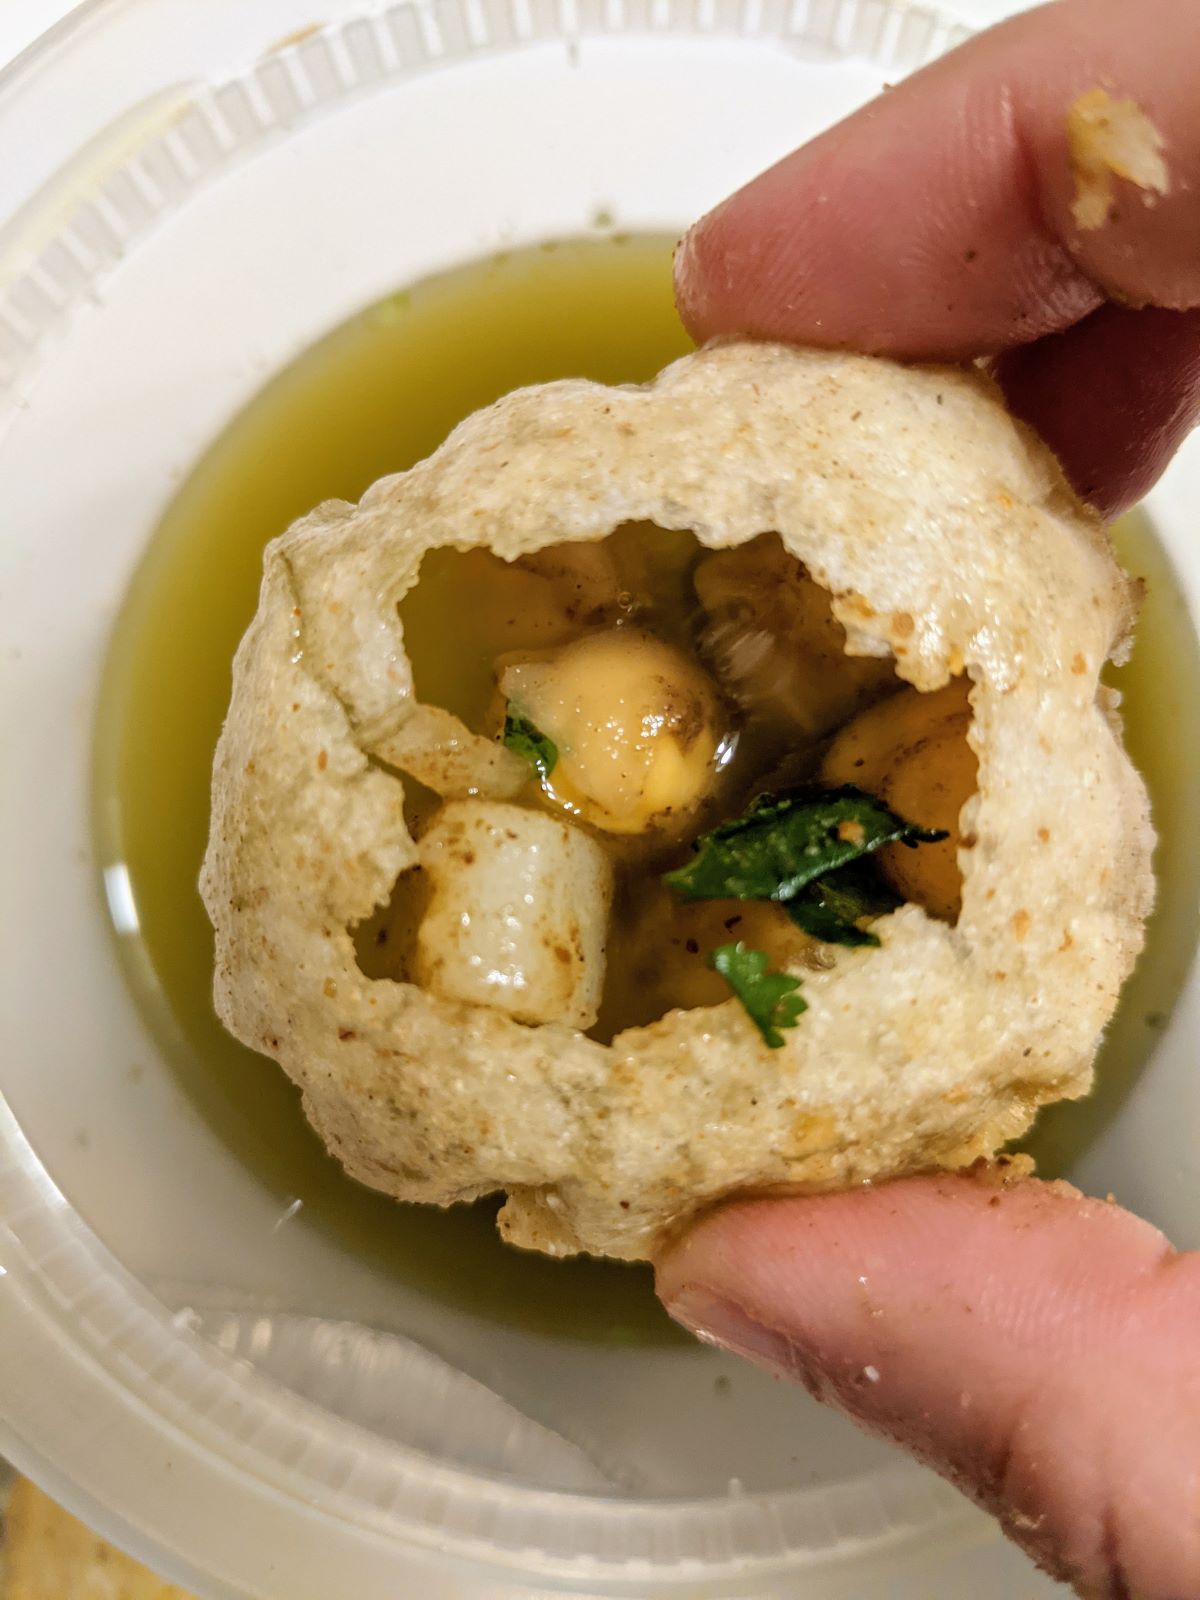 Fingers holding up a crisp round puri filled with chickpea and potato filling and tamarind water.  Underneath the puri, is the container of green tamarind water. Photo by Tias Paul.